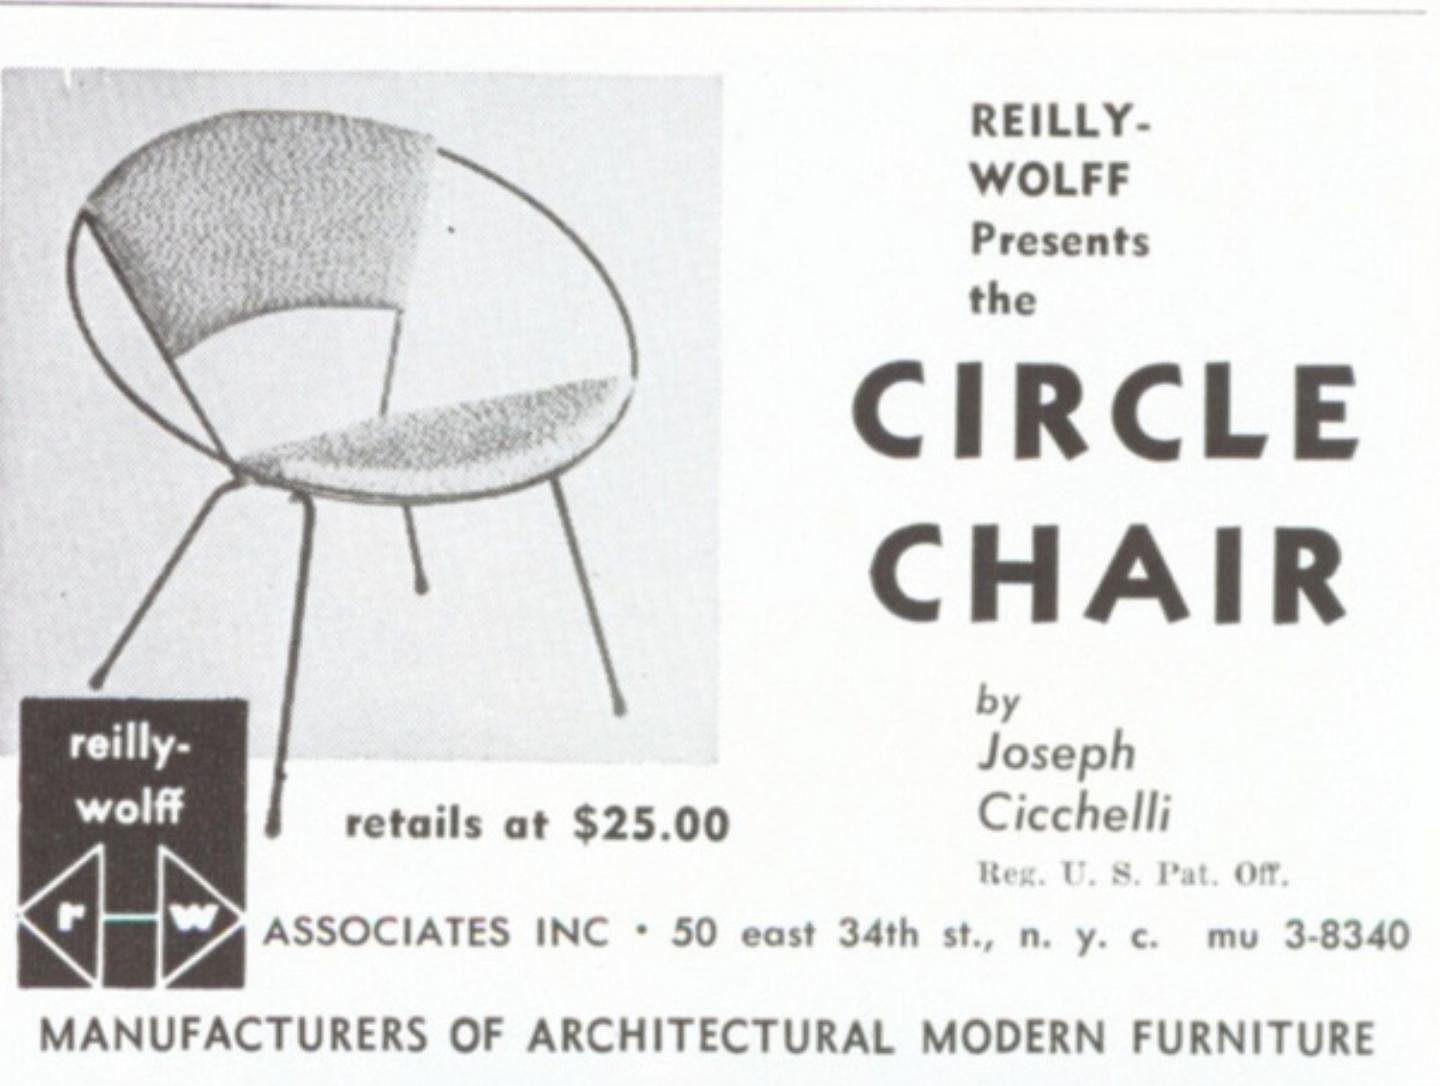 Pair of Mid-Century Black Iron Hoop Chairs by Cicchelli for Reilly-Wolff, 1950s 5